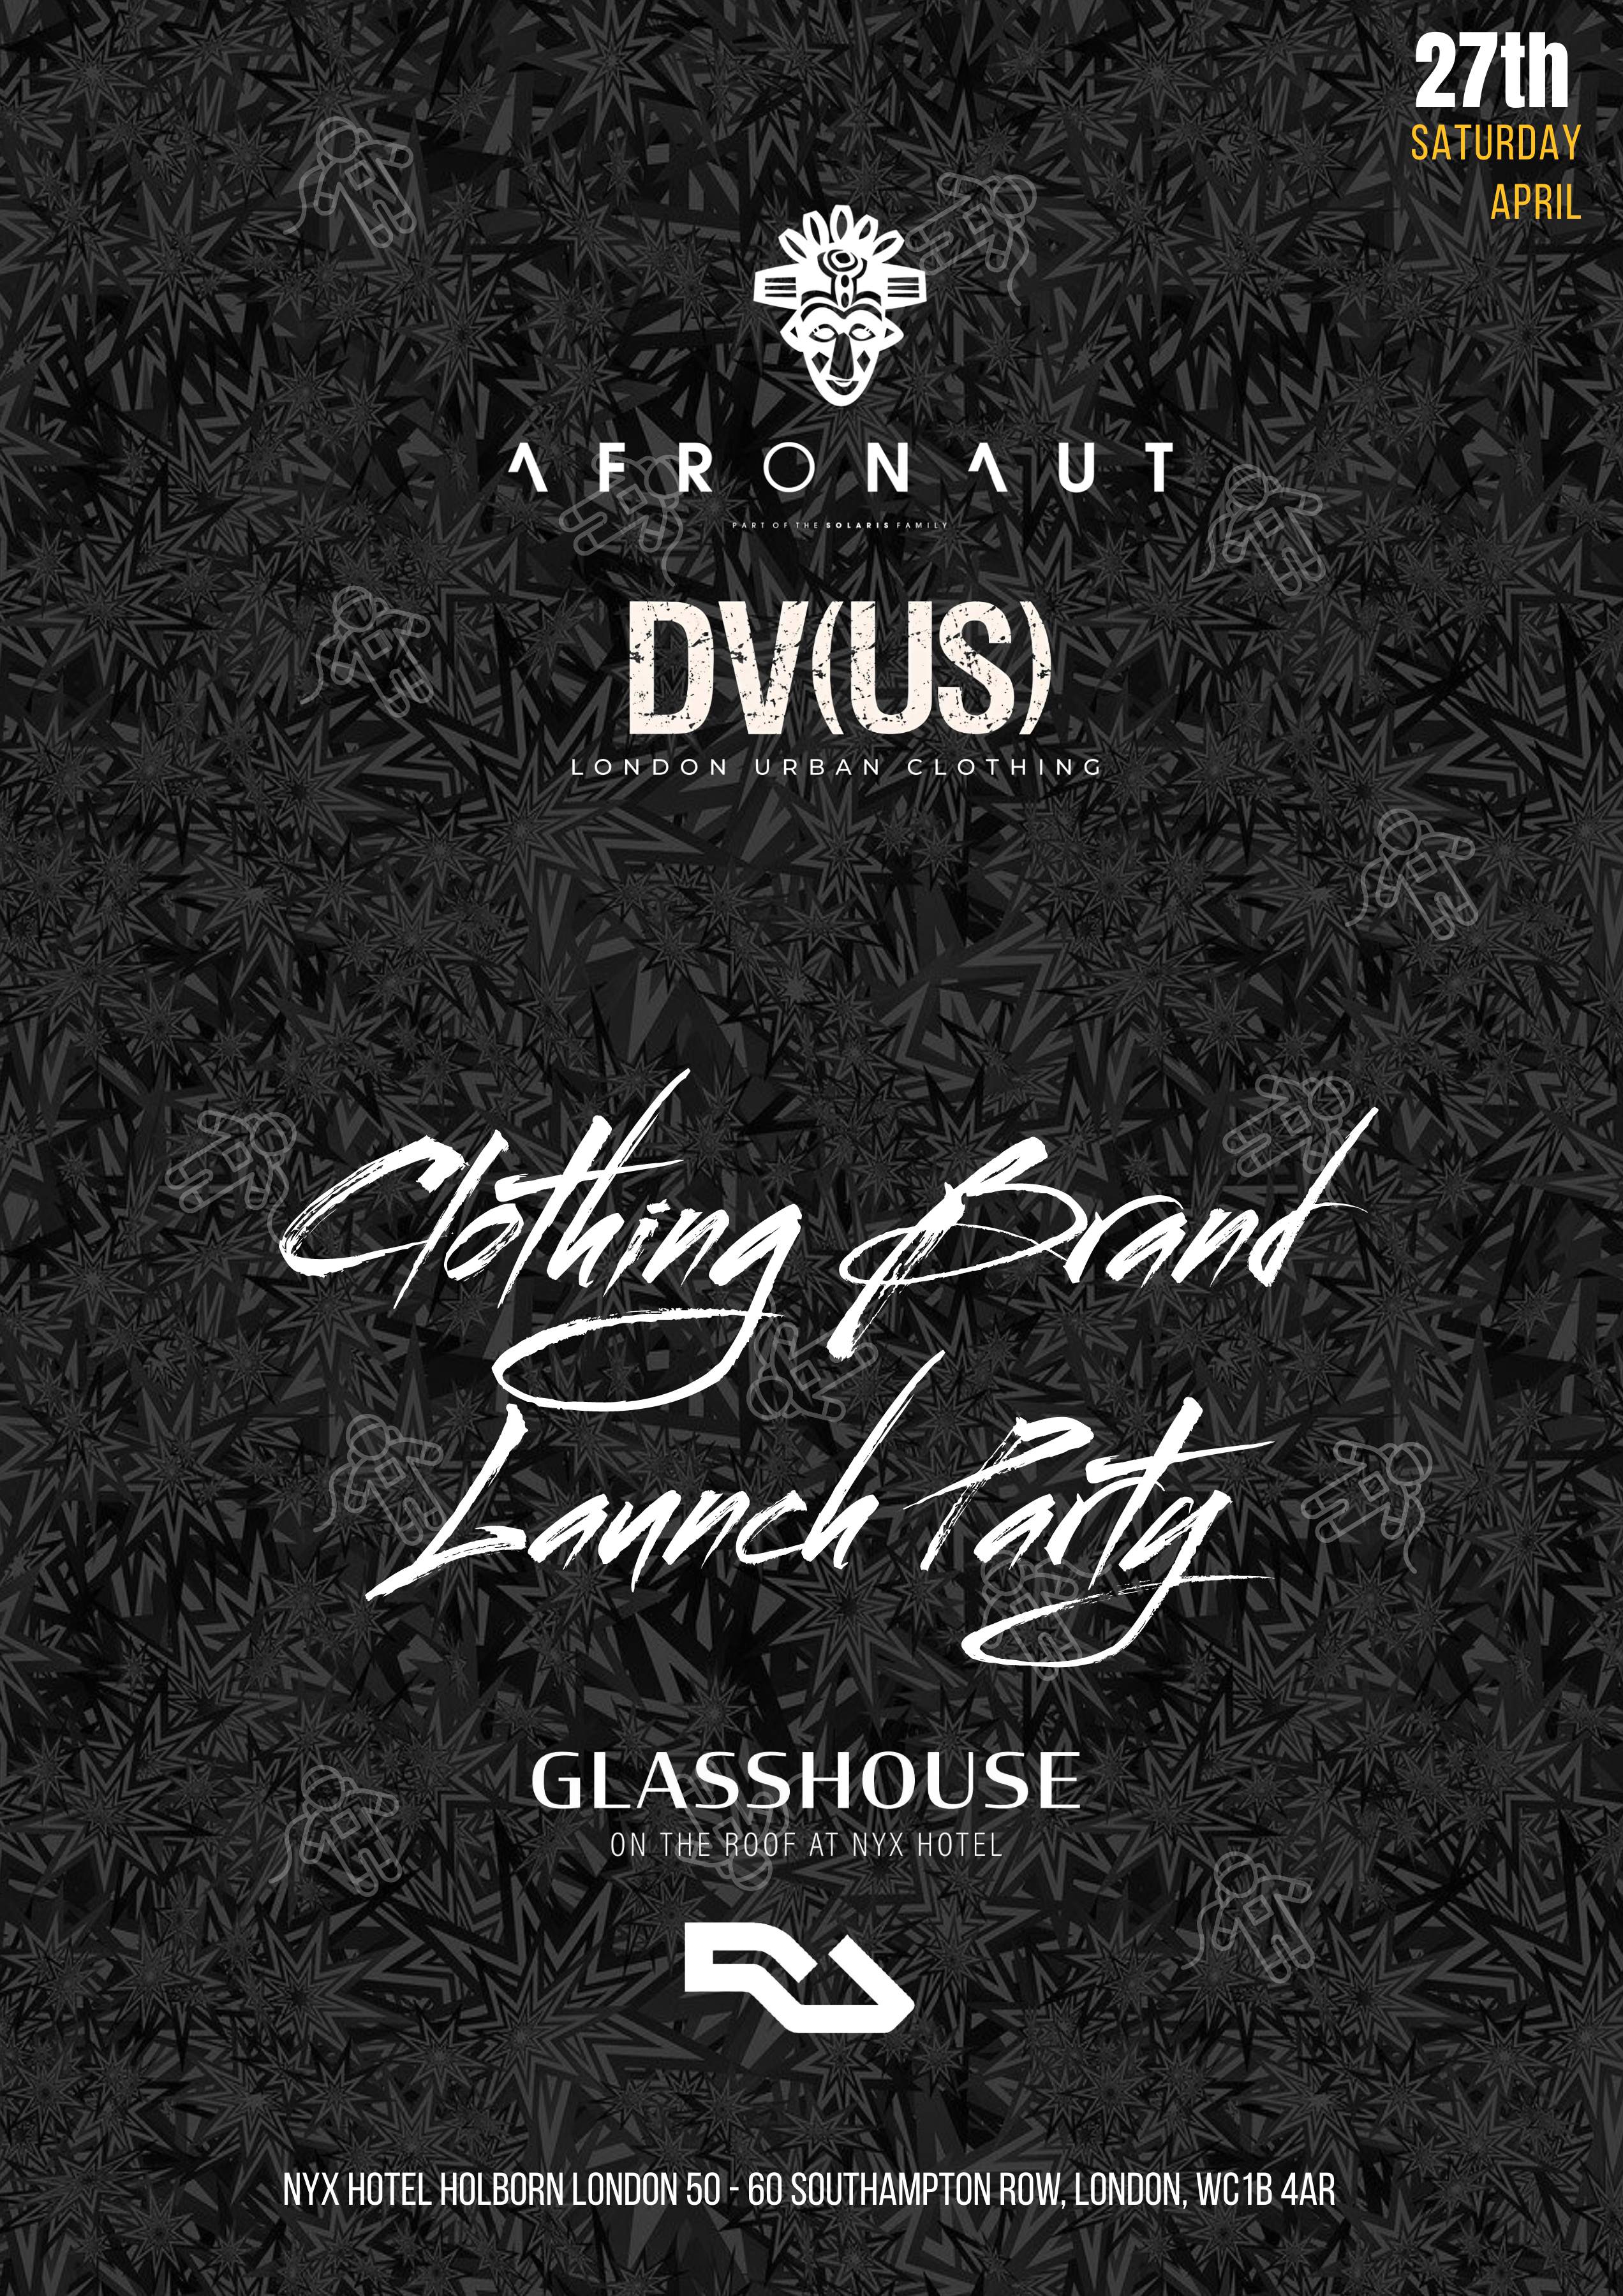 Afronaut x DV (US) - Clothing Brand Launch Party - フライヤー表